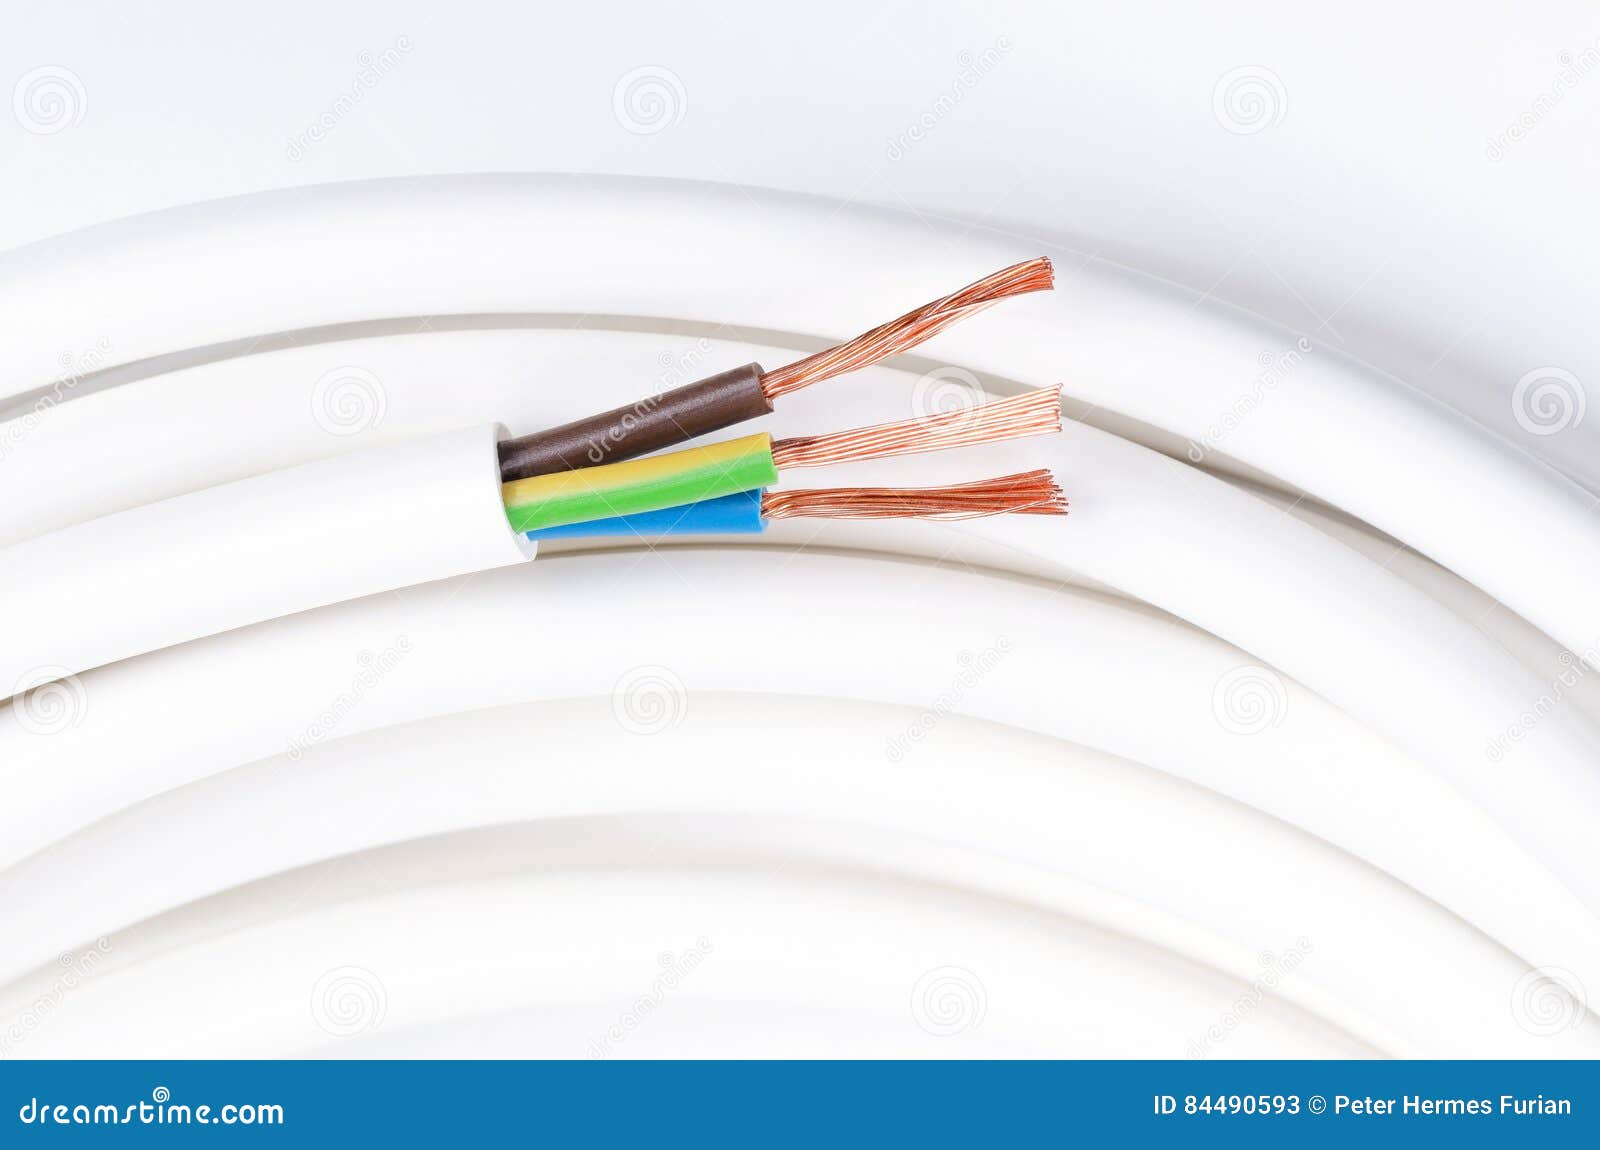 electrical cable with three insulated conductors, horizontal